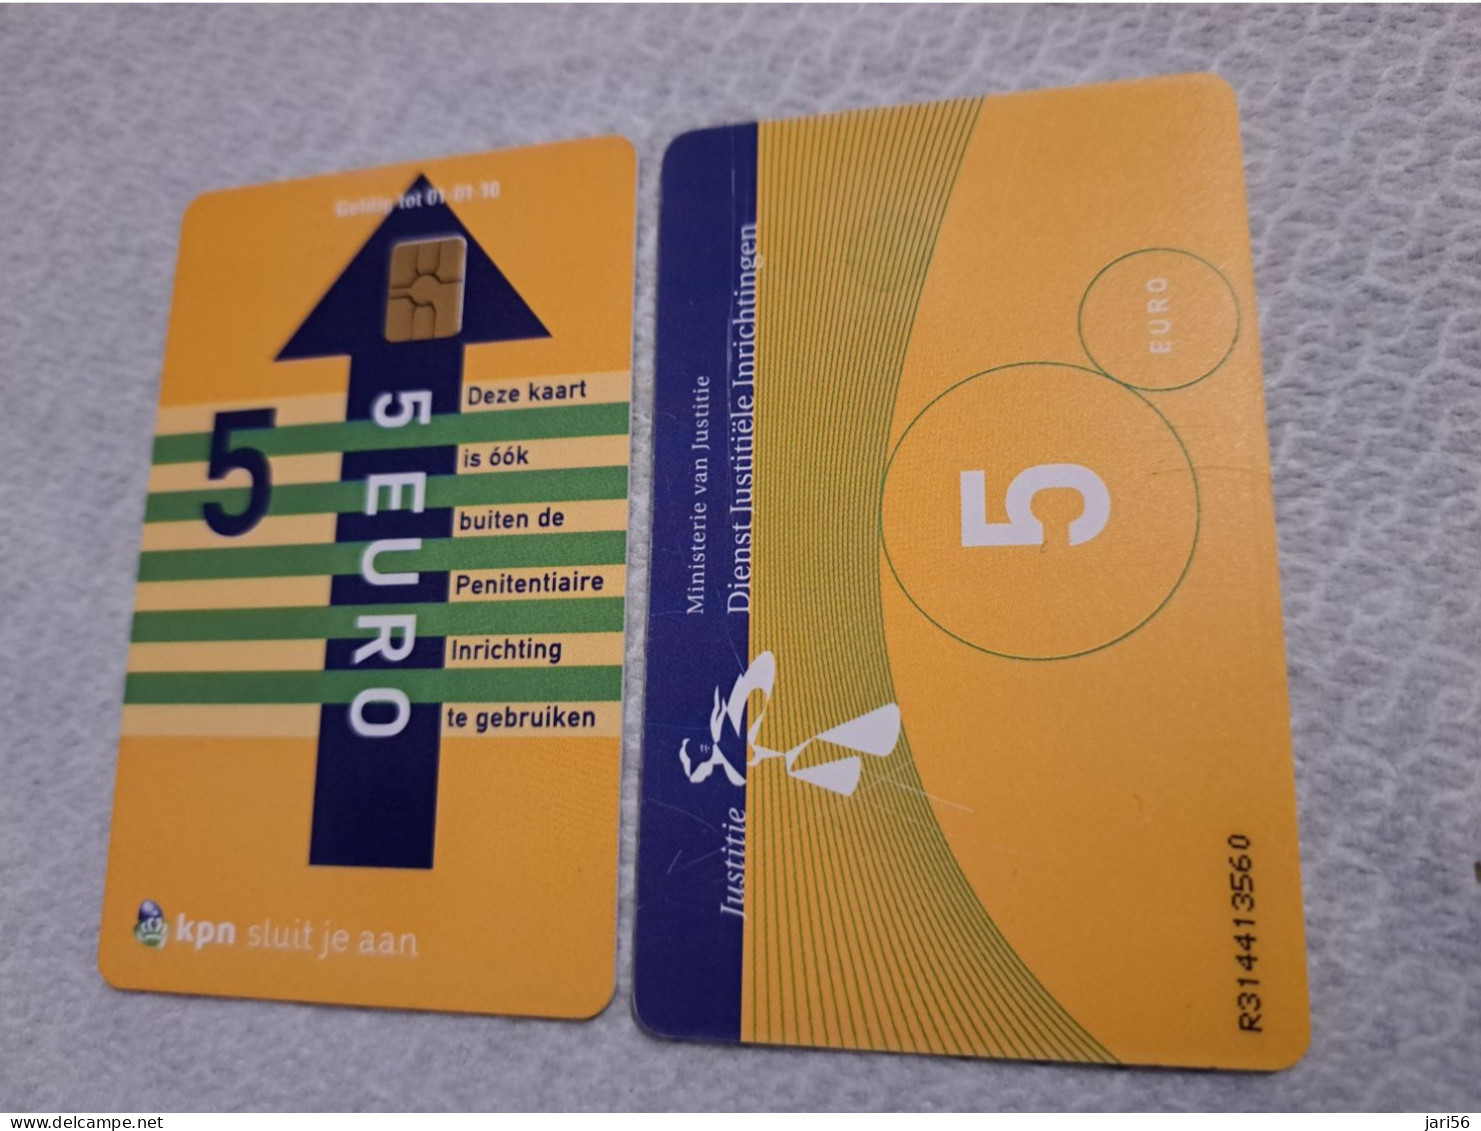 NETHERLANDS   € 5,-  ,-  / USED  / DATE  01-01-10  JUSTITIE/PRISON CARD  CHIP CARD/ USED   ** 16148** - [3] Sim Cards, Prepaid & Refills